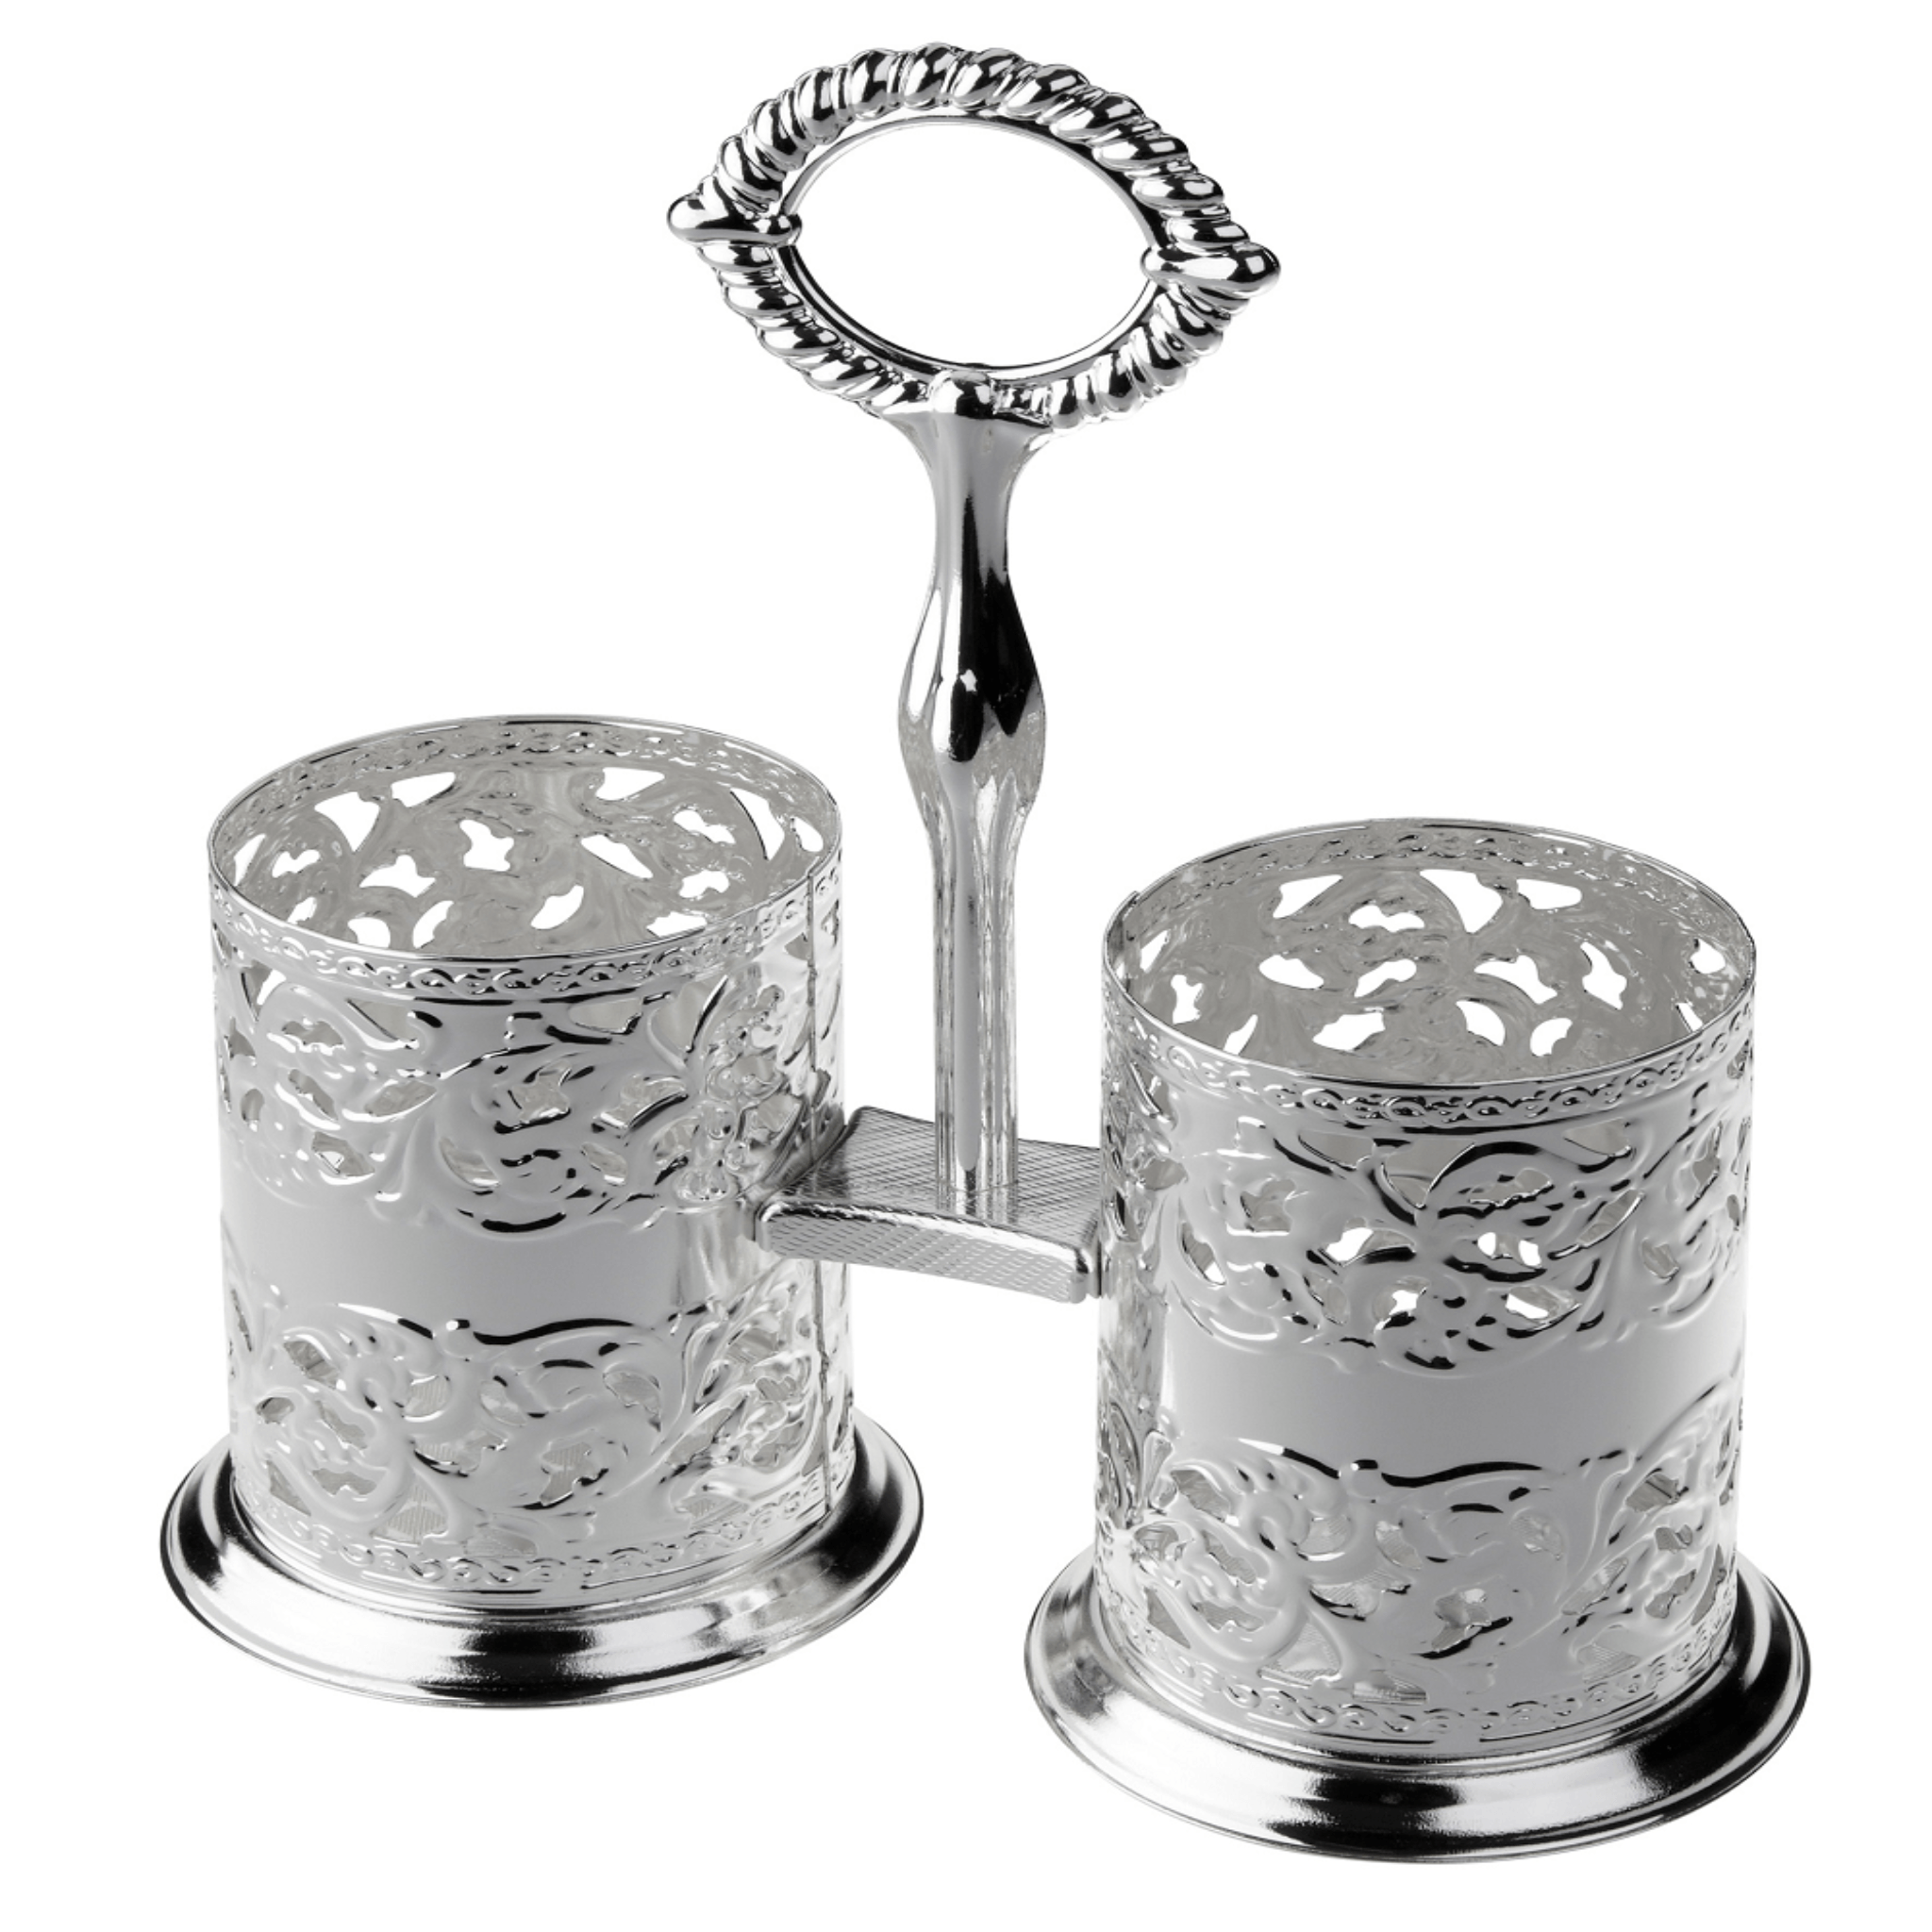 Queen Anne Double Cutlery Holder - Silver Plated Metal - 26000290